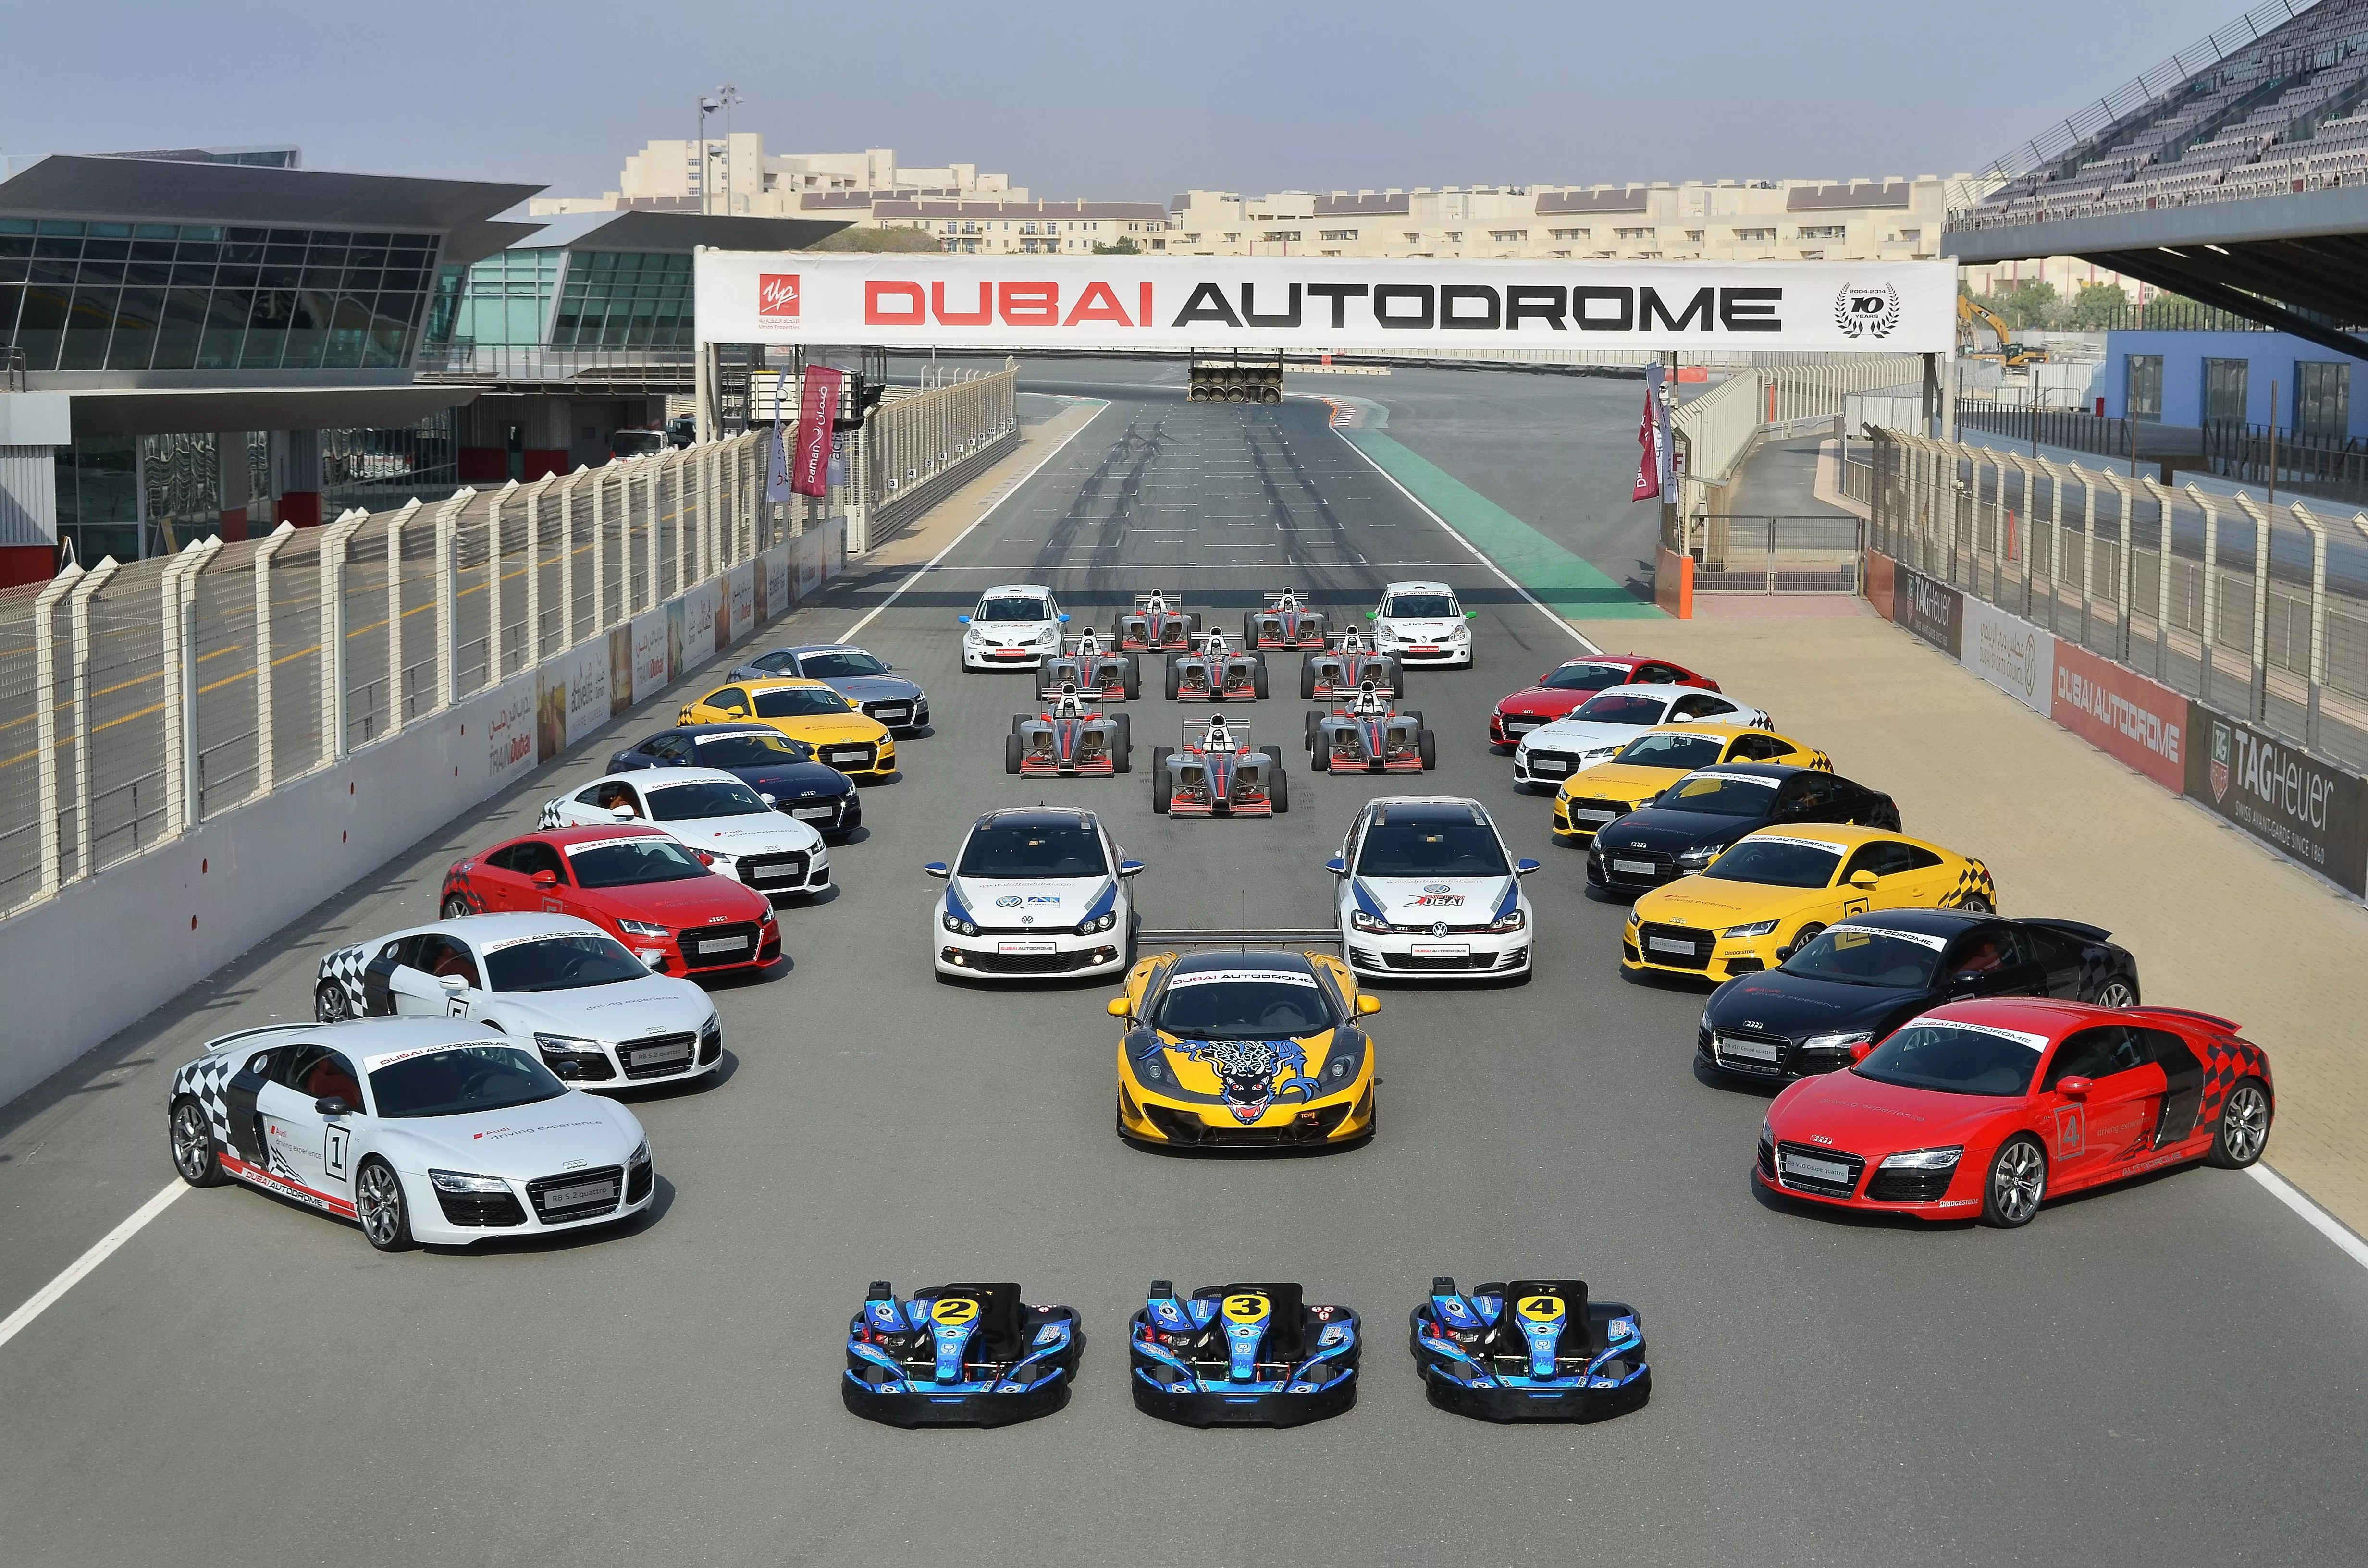 Dubai Autodrome in United Arab Emirates, Middle East | Racing,Motorcycles,Karting - Rated 8.4